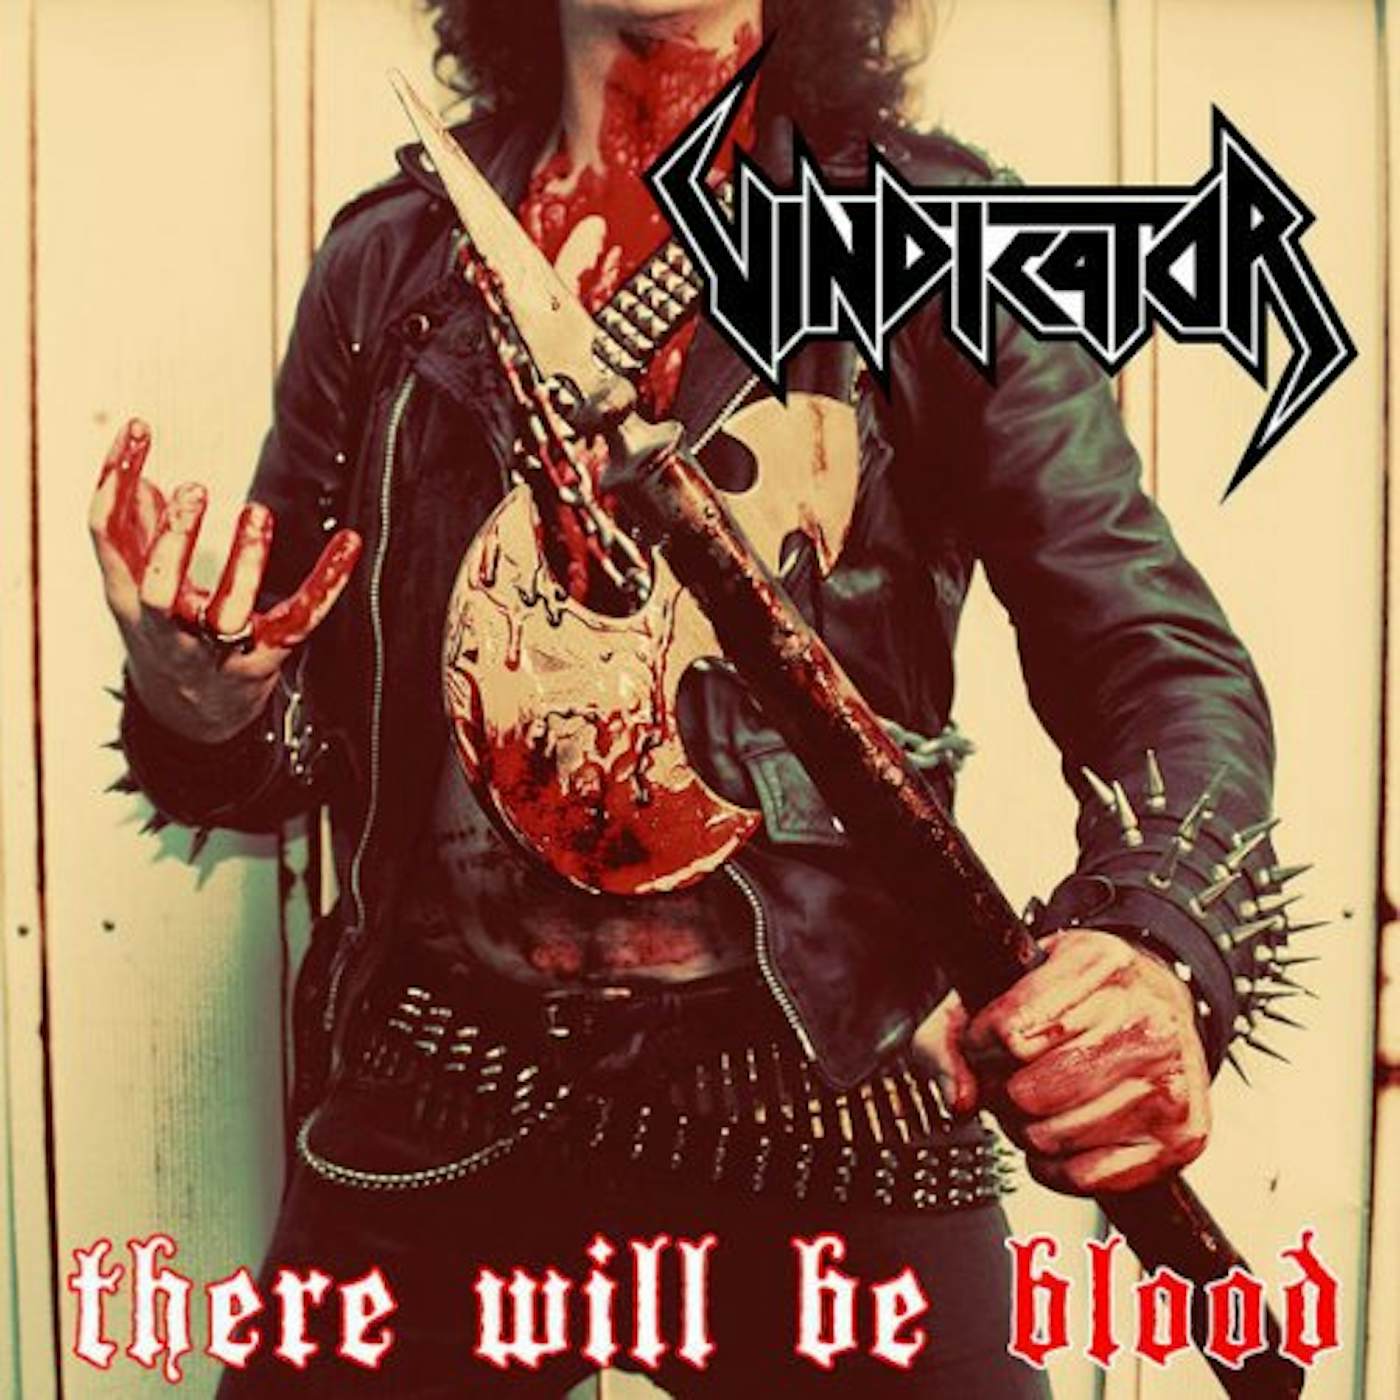 Vindicator THERE WILL BE BLOOD Vinyl Record